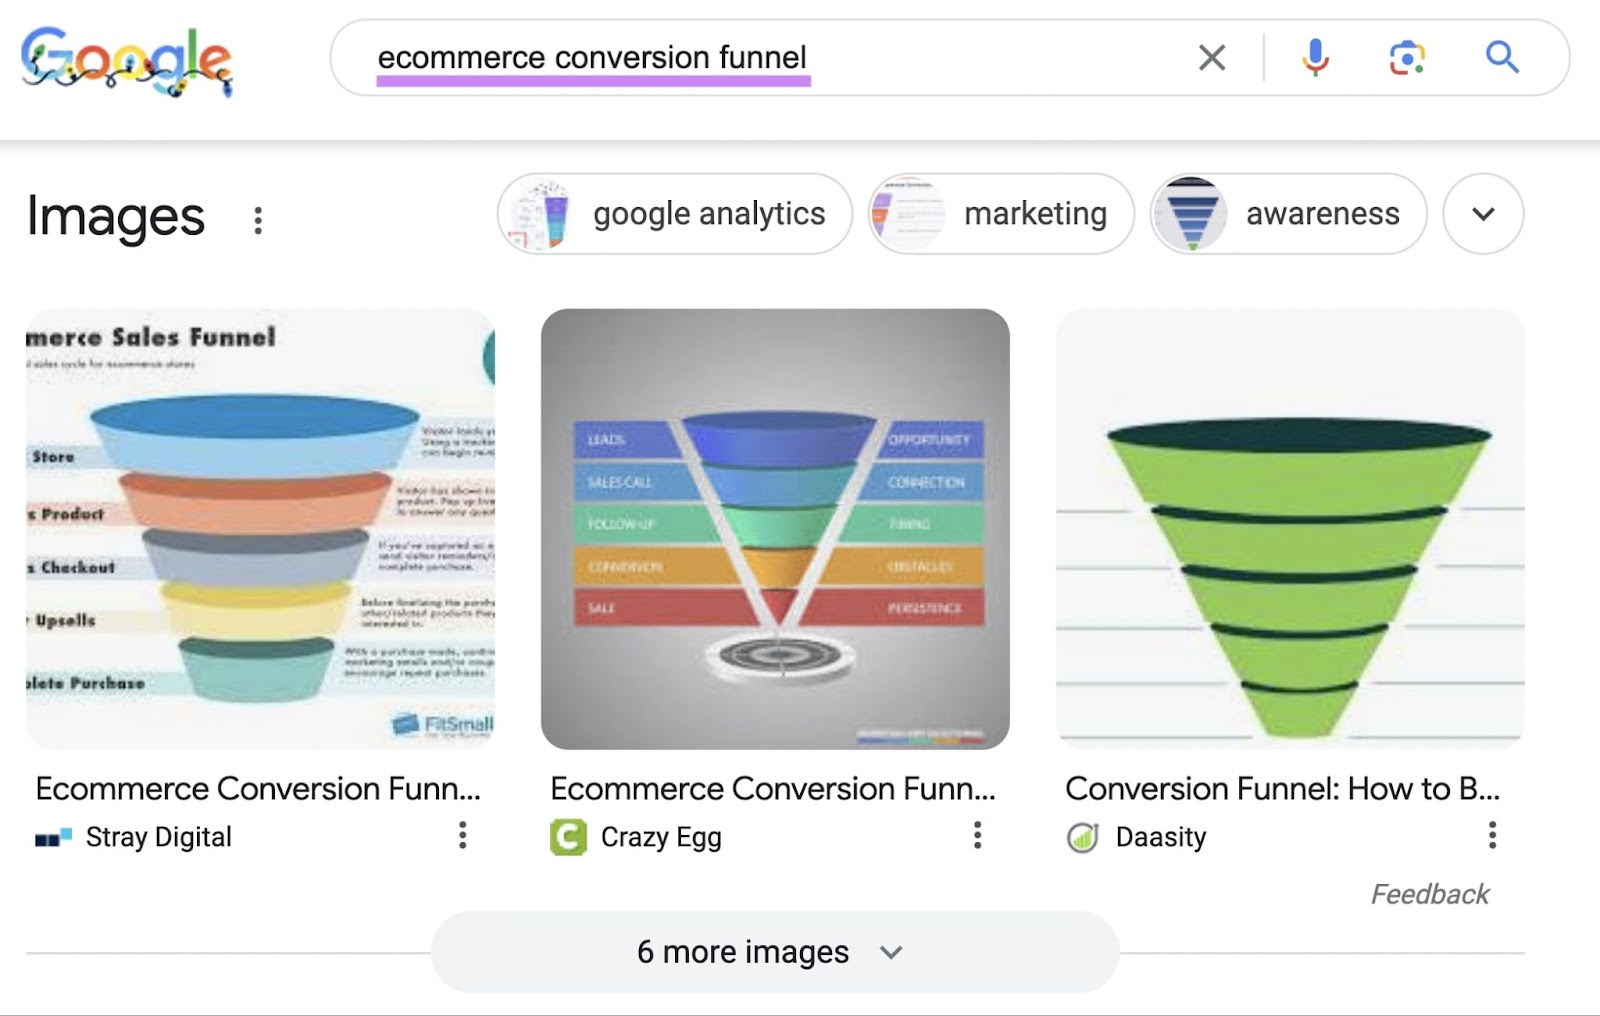 Google Images results for “ecommerce conversion funnel"